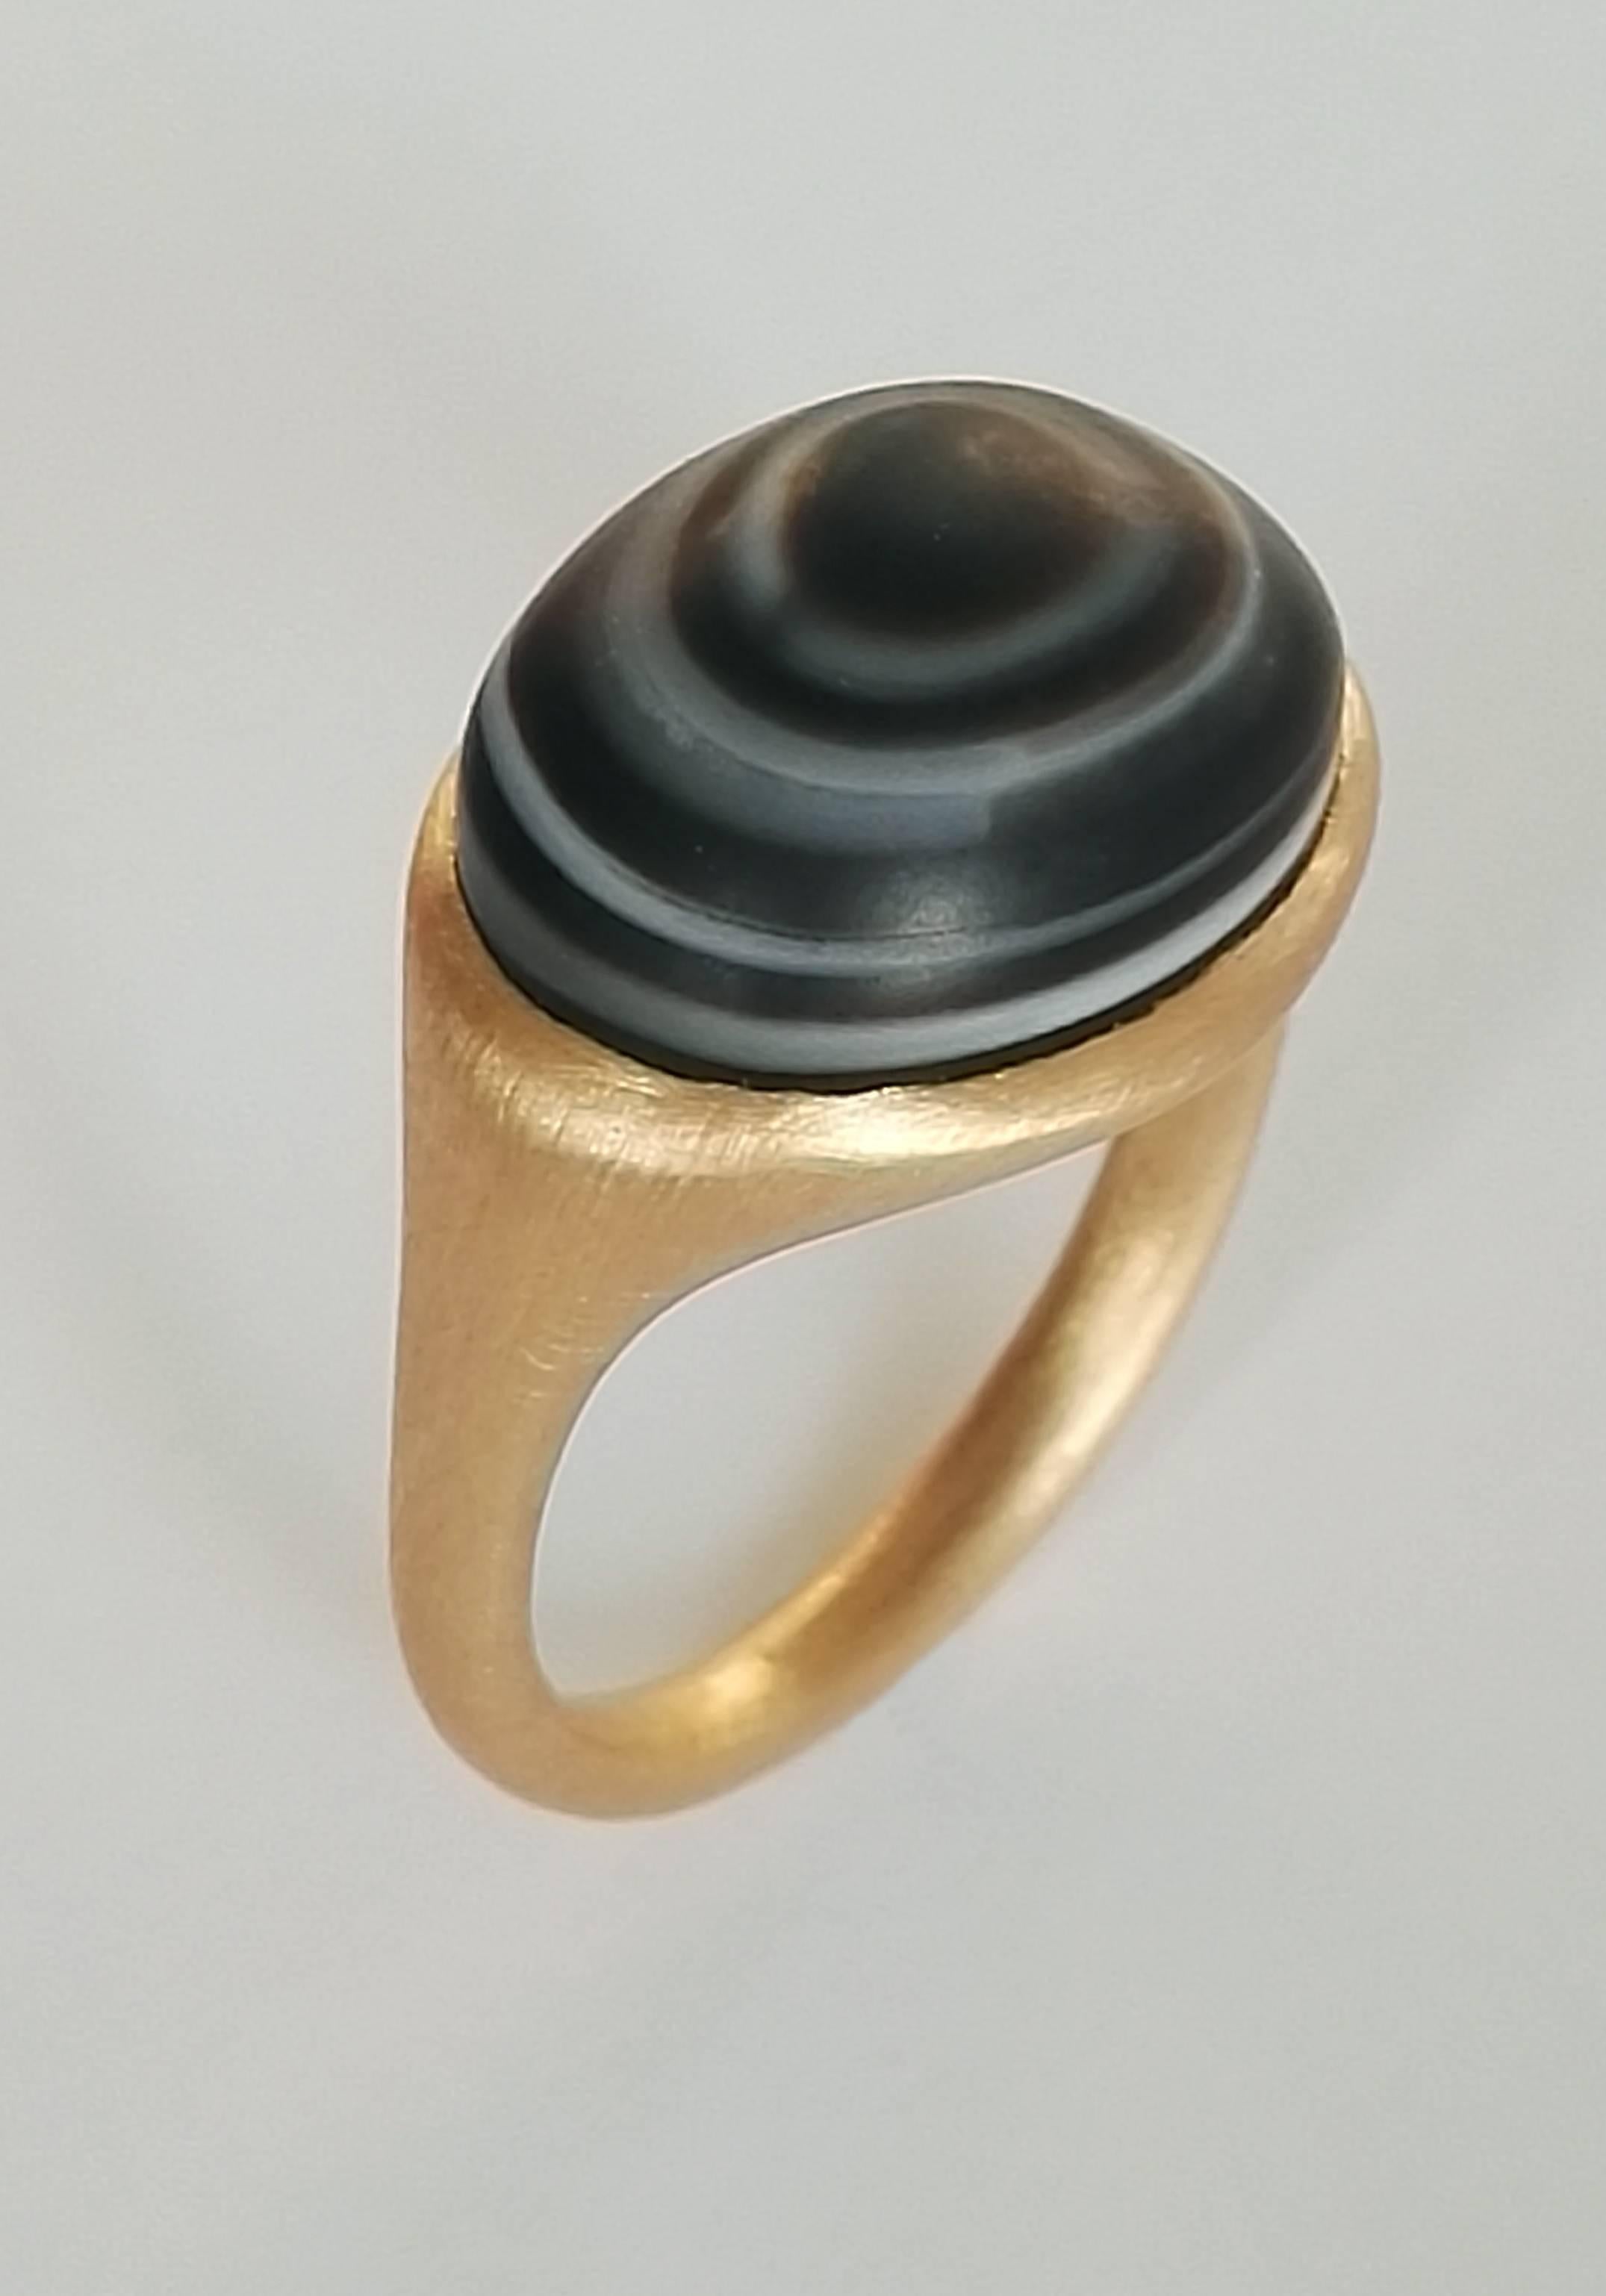 Dalben design unisex one of a kind 18k yellow gold satin finishing ring with a 11,5 carat bezel-set dark brown and white banded agate.  size 8 USA - 57 EU re-sizable to most finger sizes. The Ring has been designed and handcrafted in our atelier in